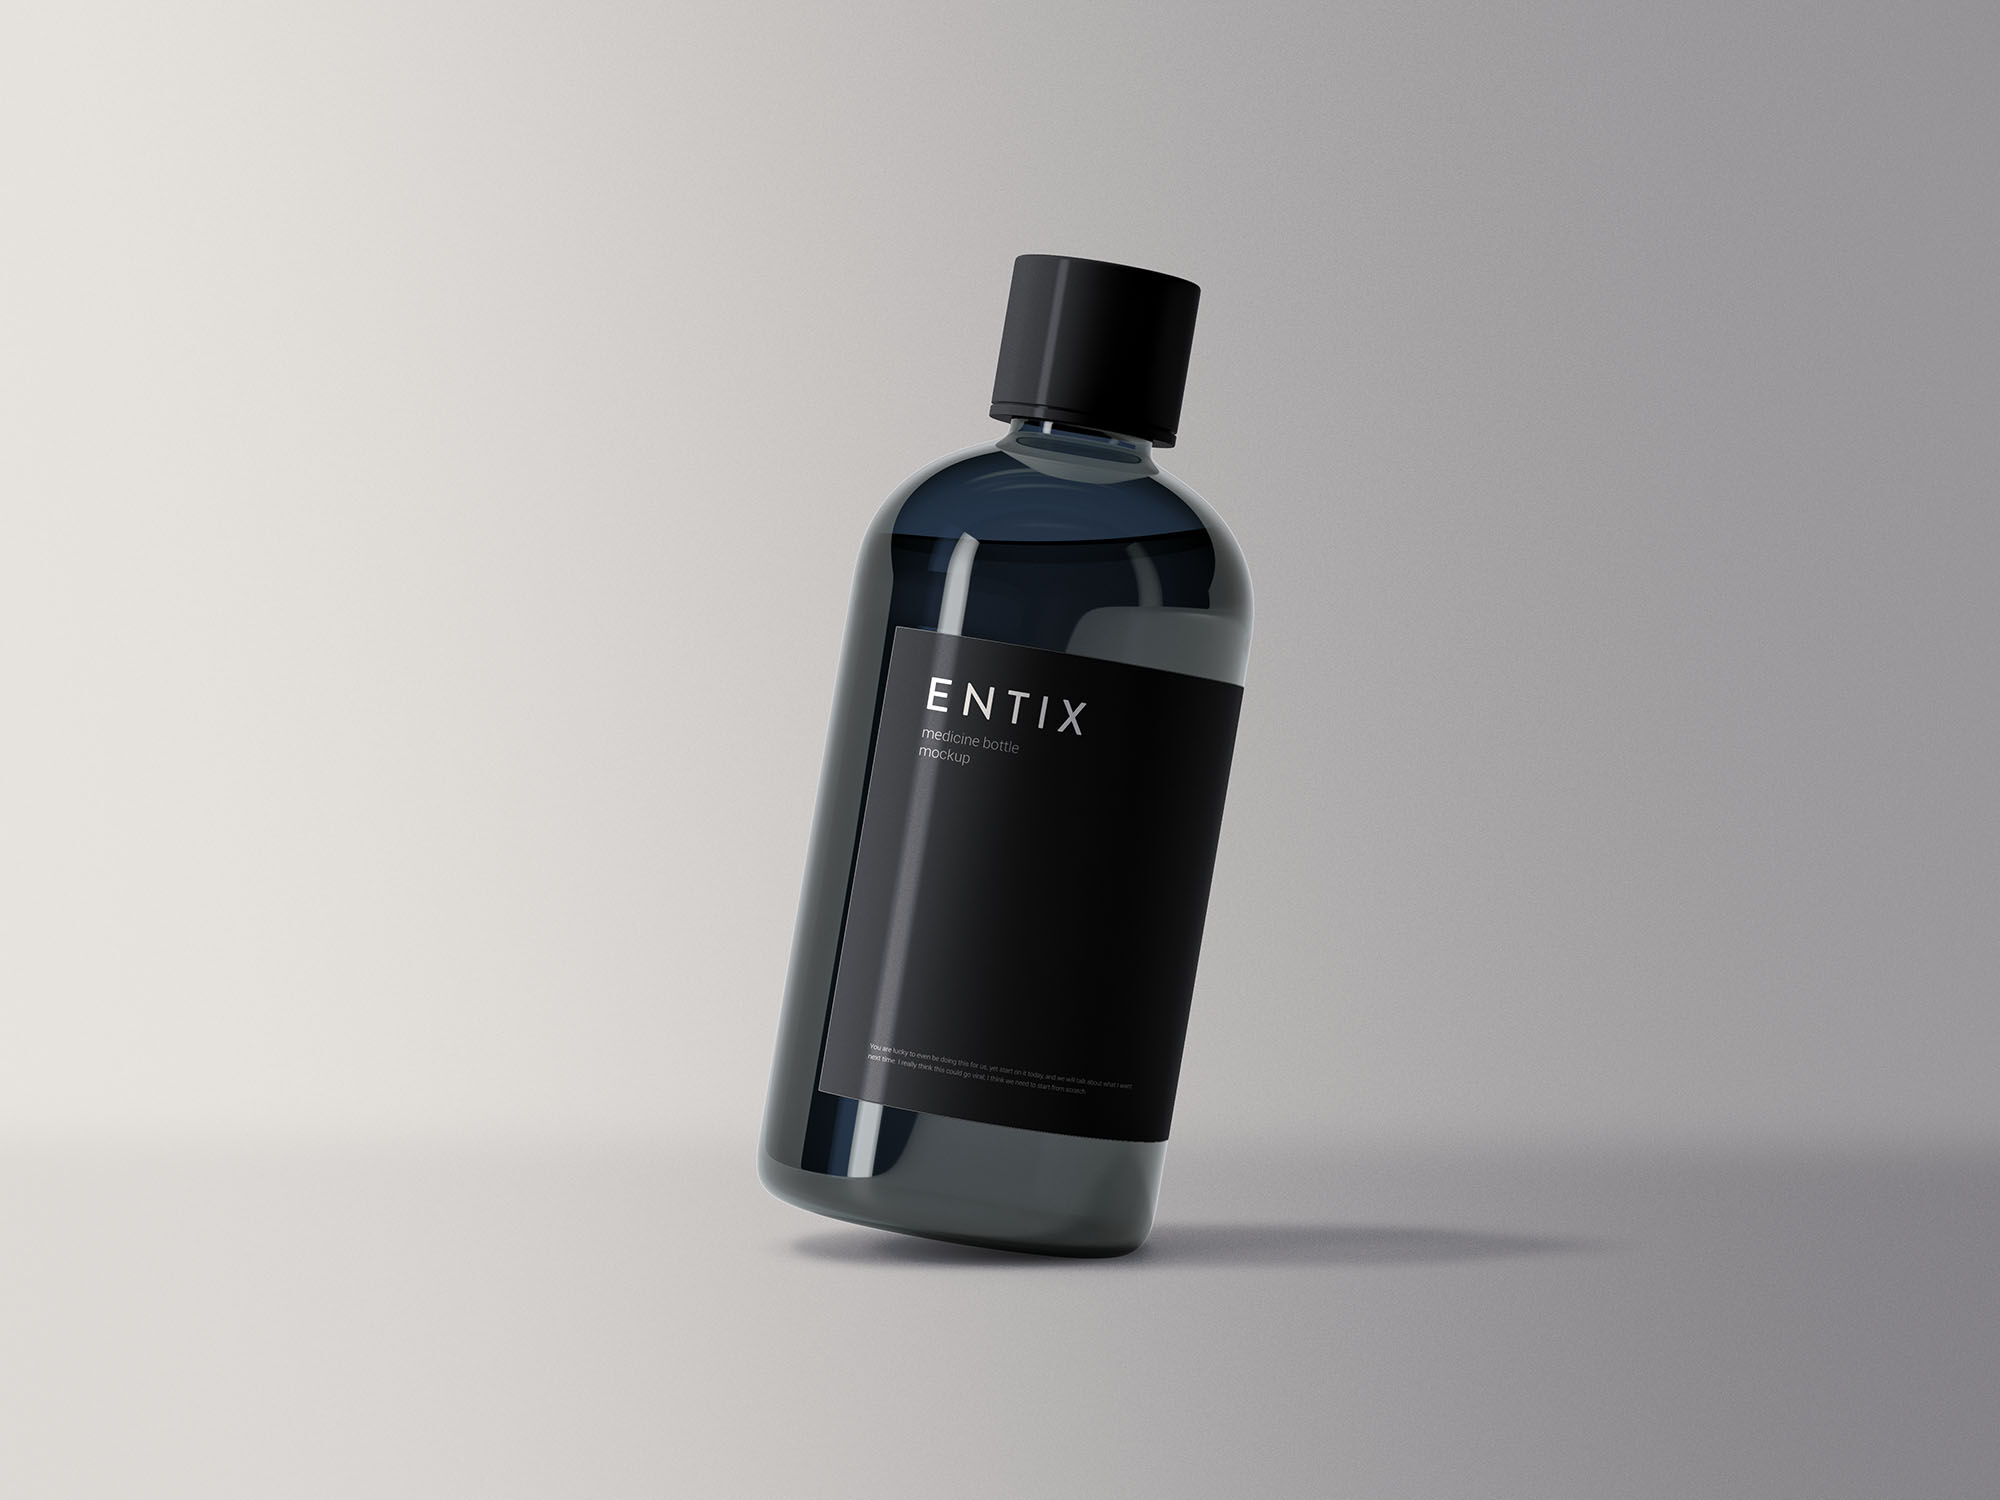 Medicine Bottle Mockup With Label And Adjustable Shadows FREE PSD